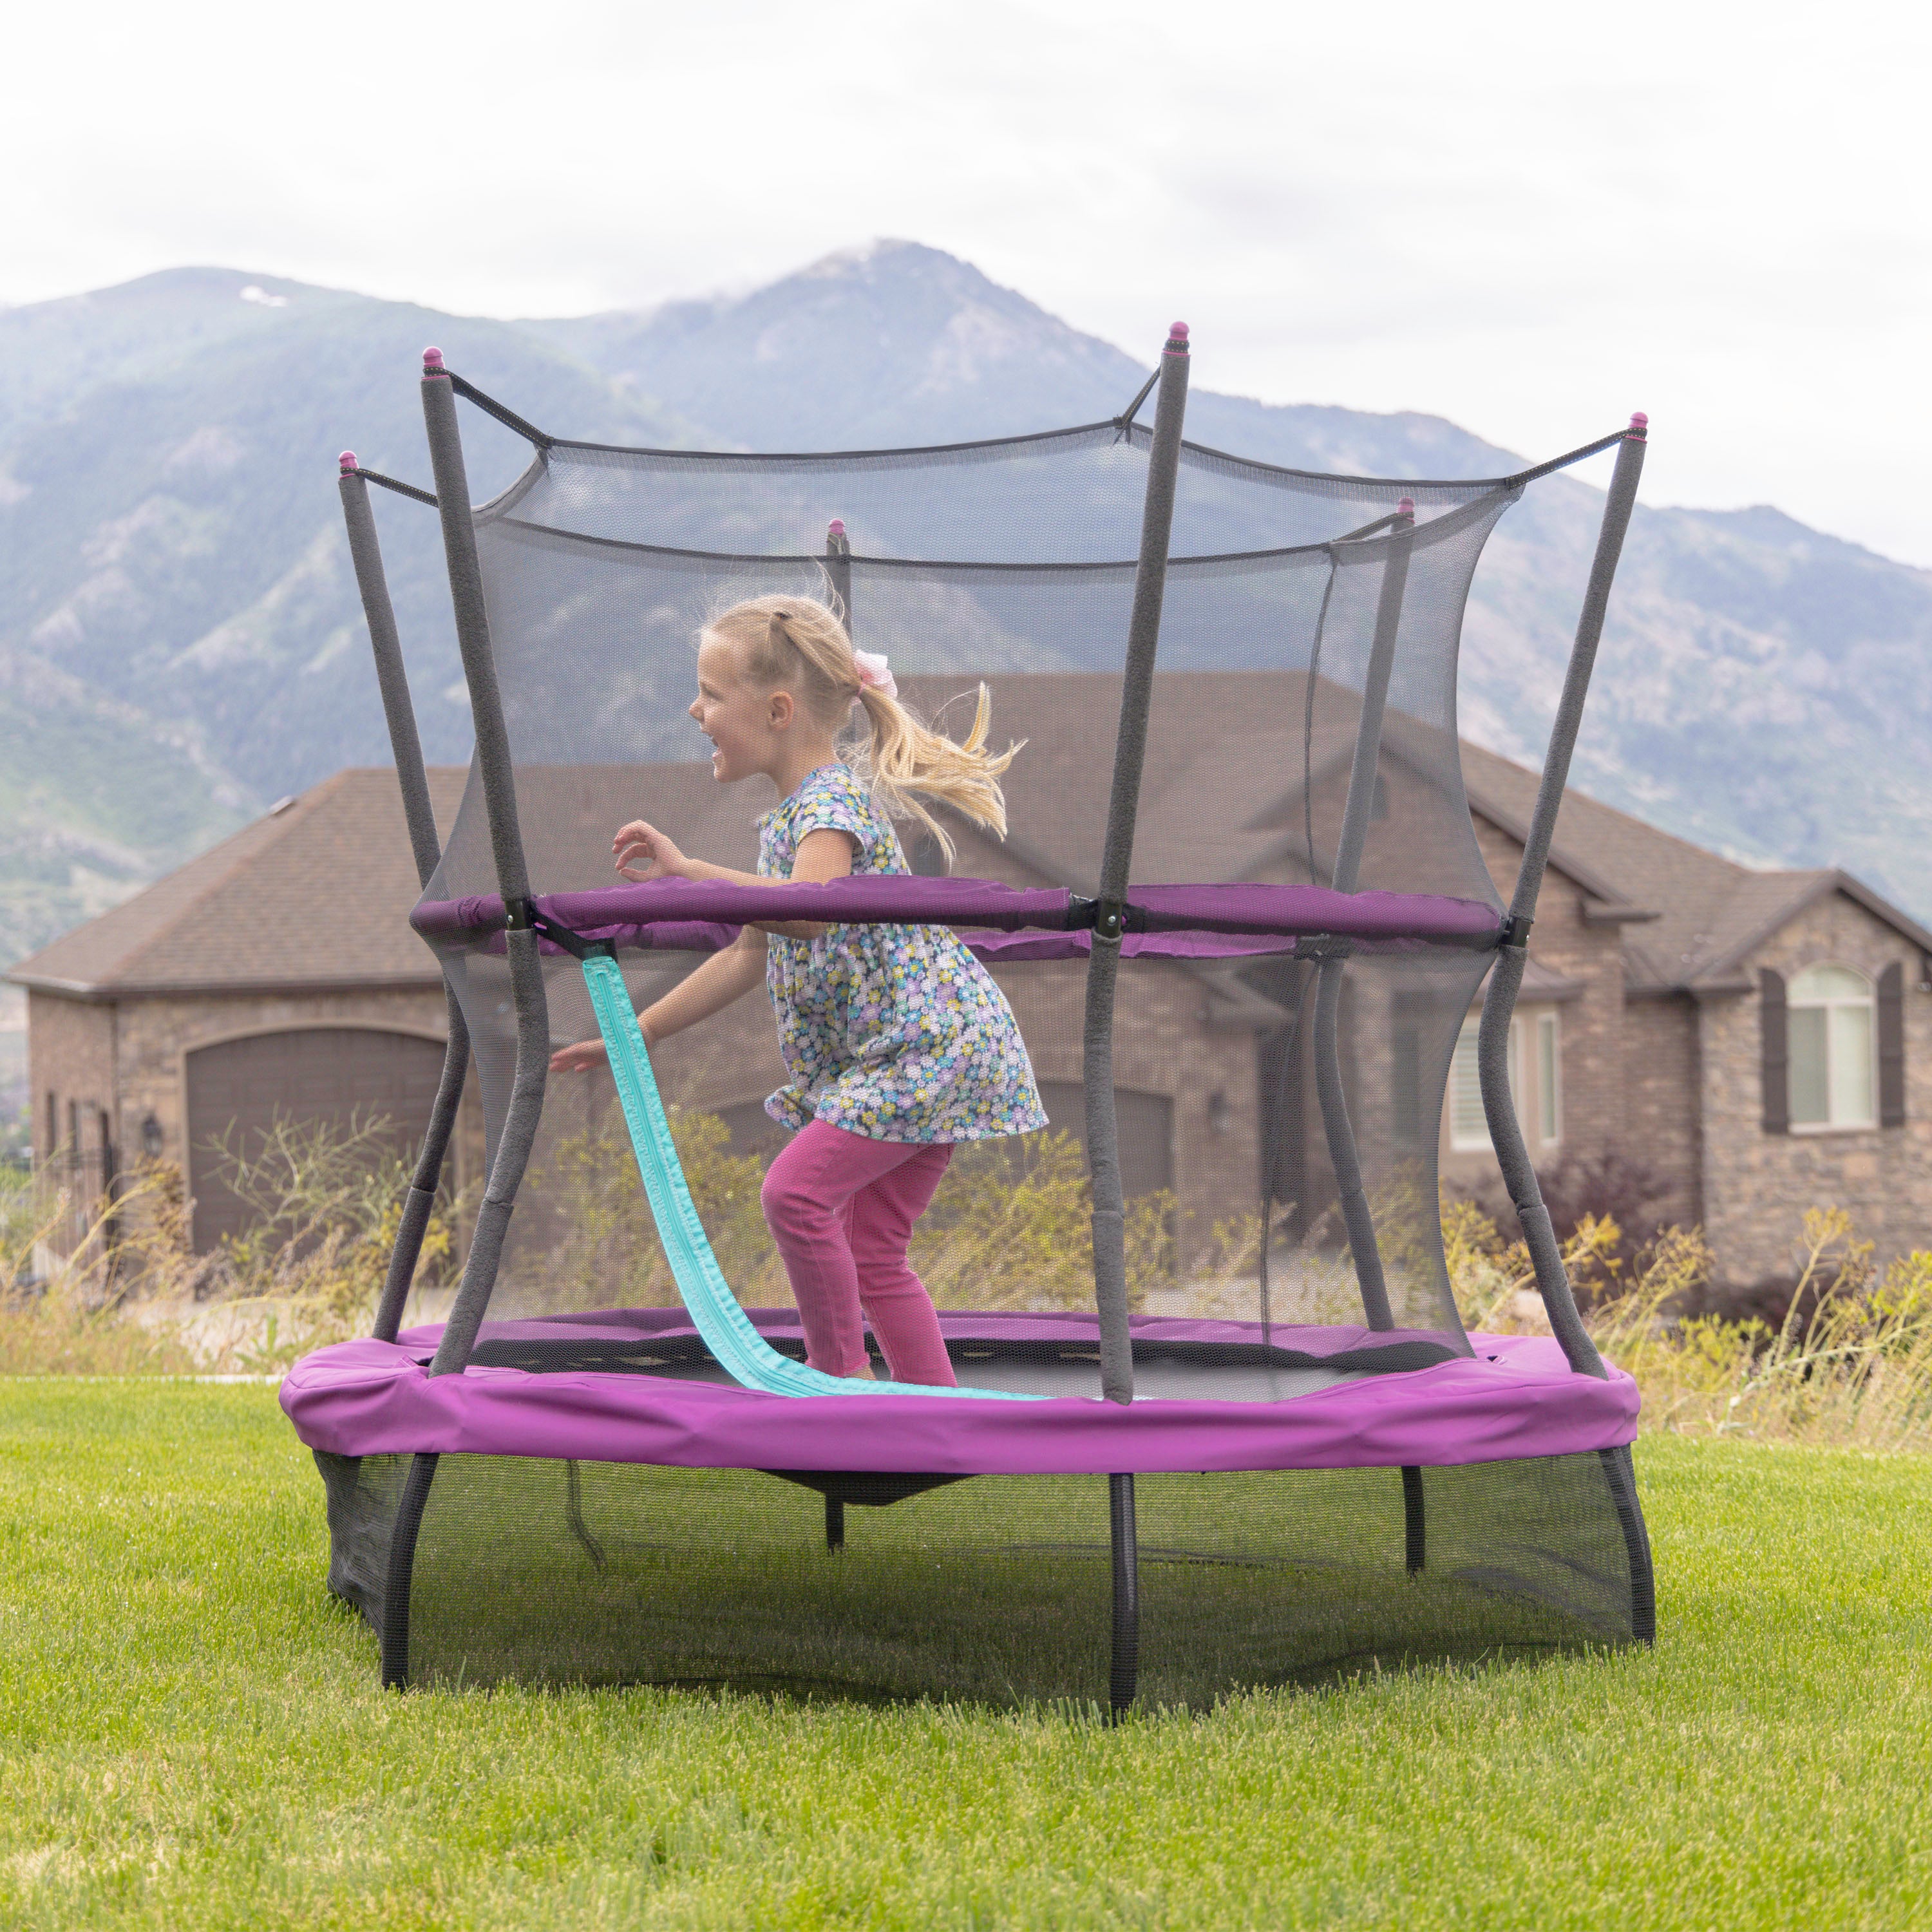 A young girl jumps in the backyard on her 60” Eeyore trampoline. 